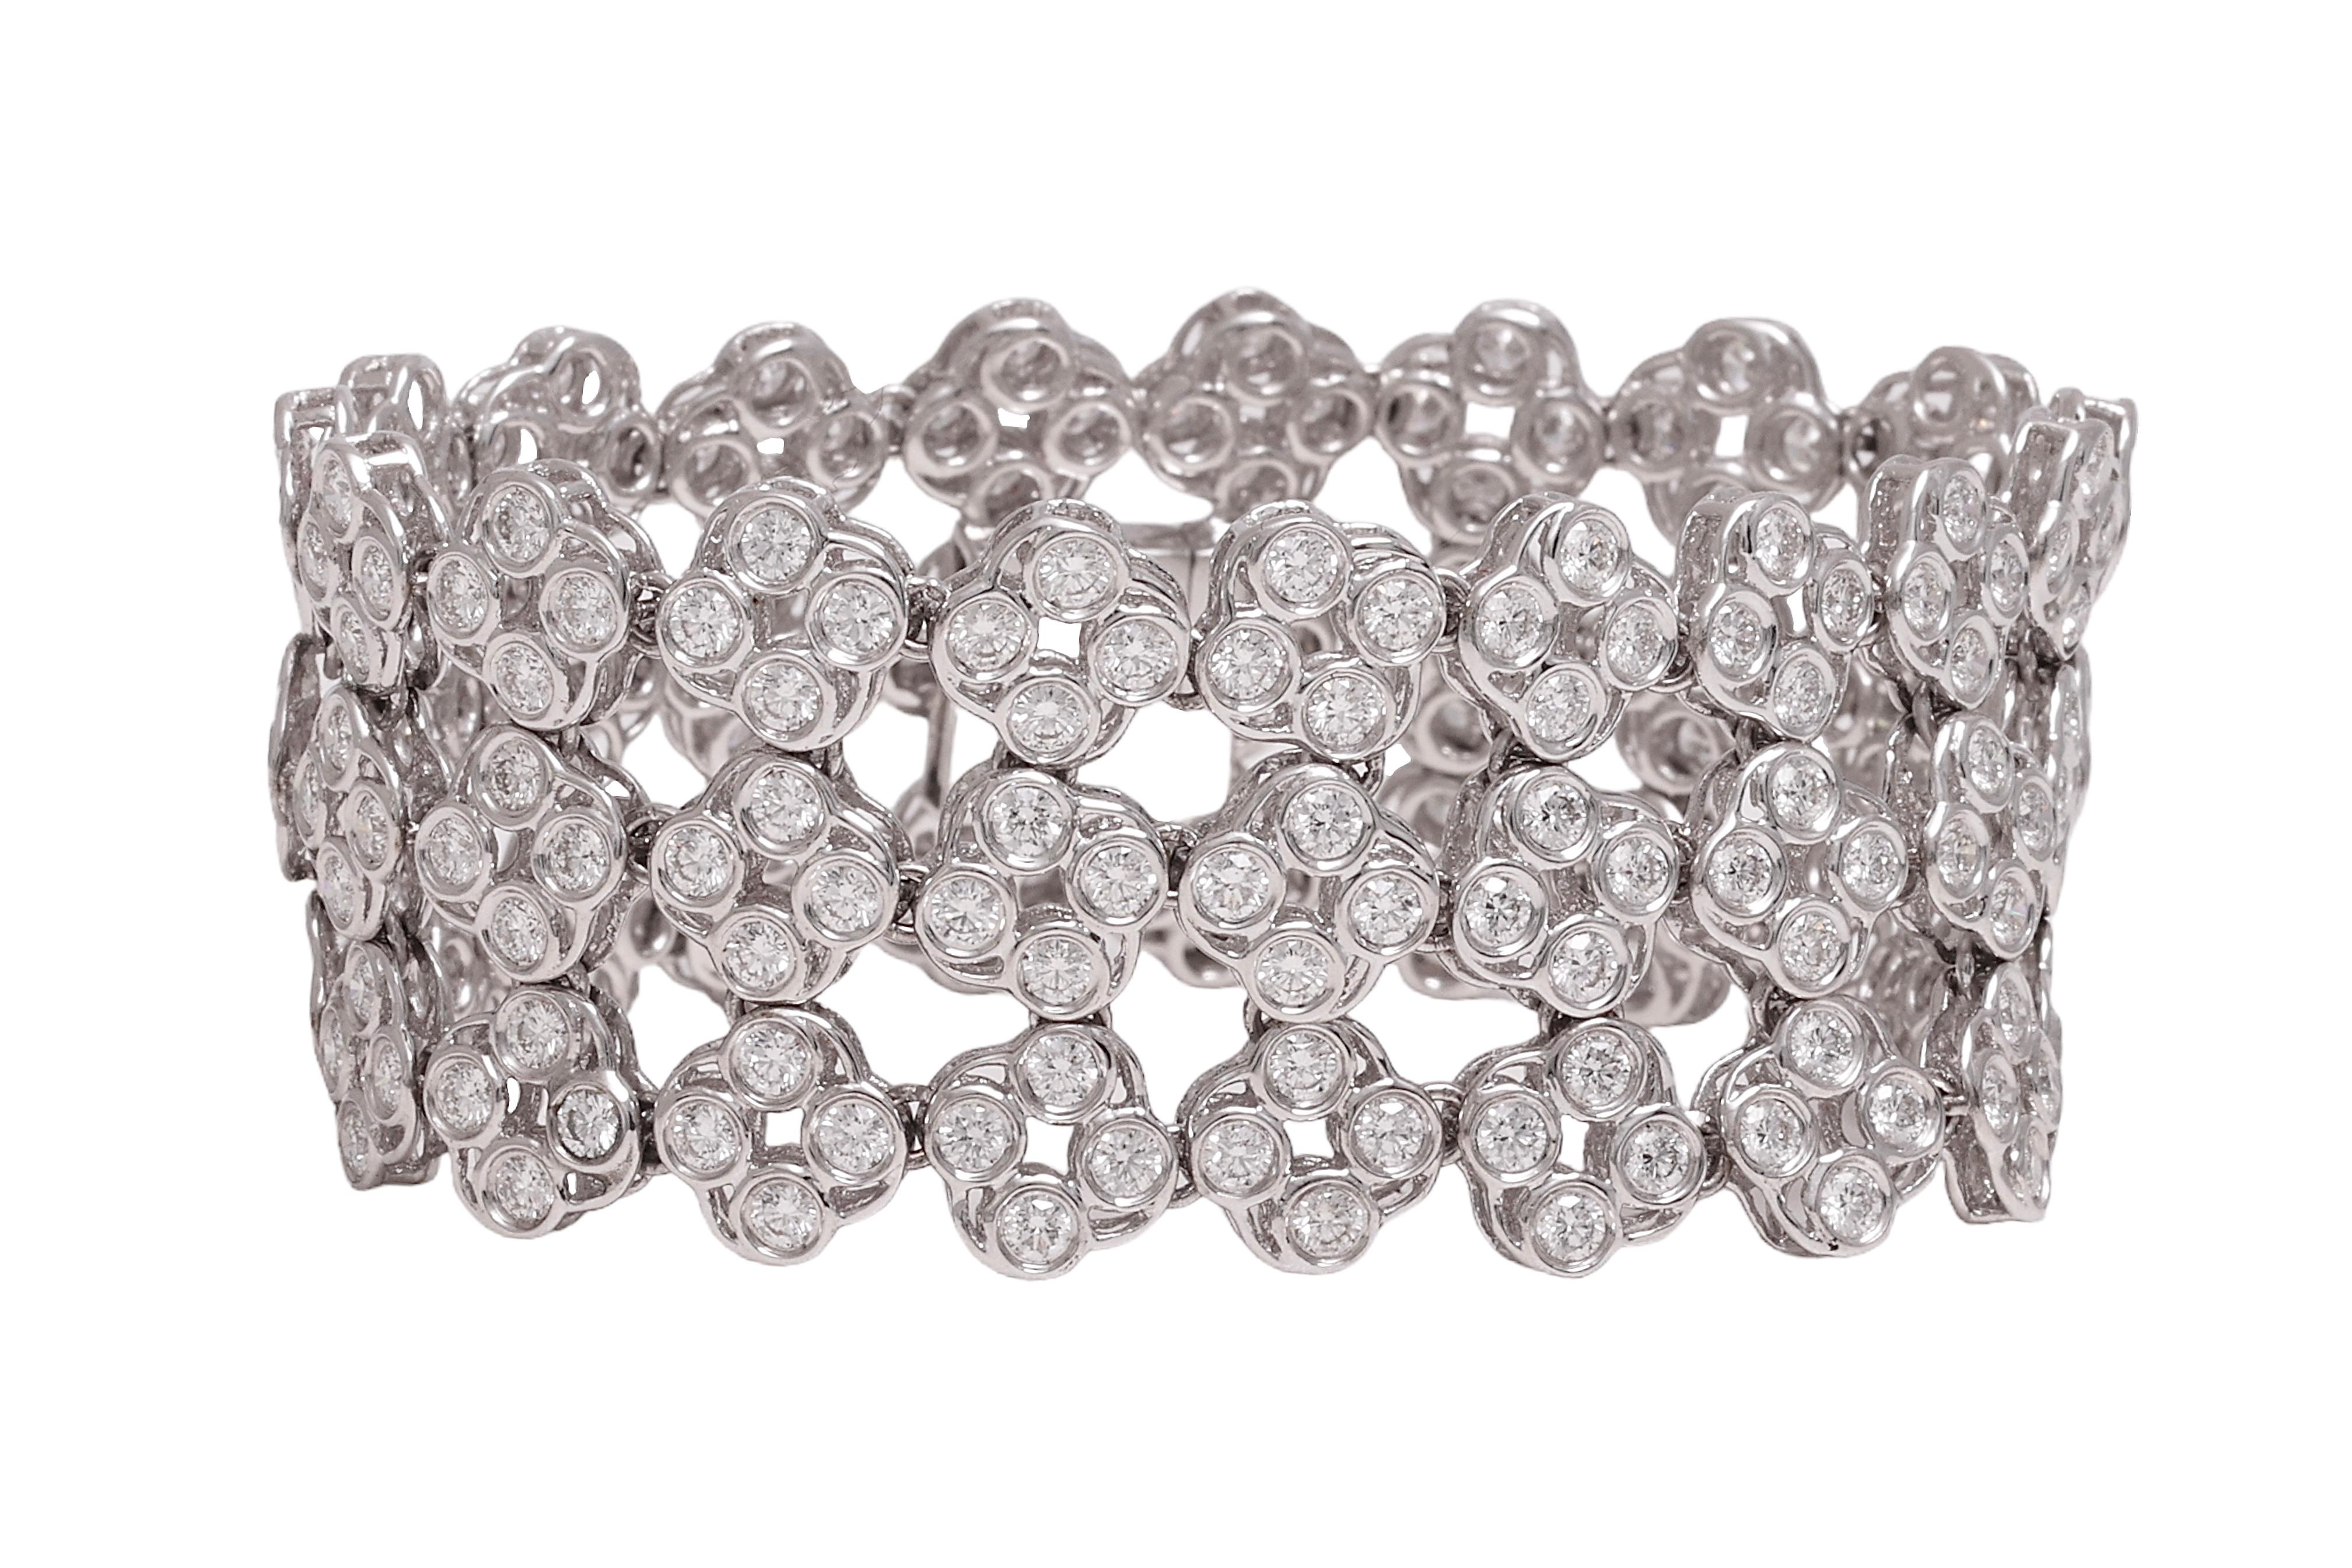 18 kt. White Gold 3 Row Tennis Bracelet With 10.57 ct. Round Cut Diamonds For Sale 1